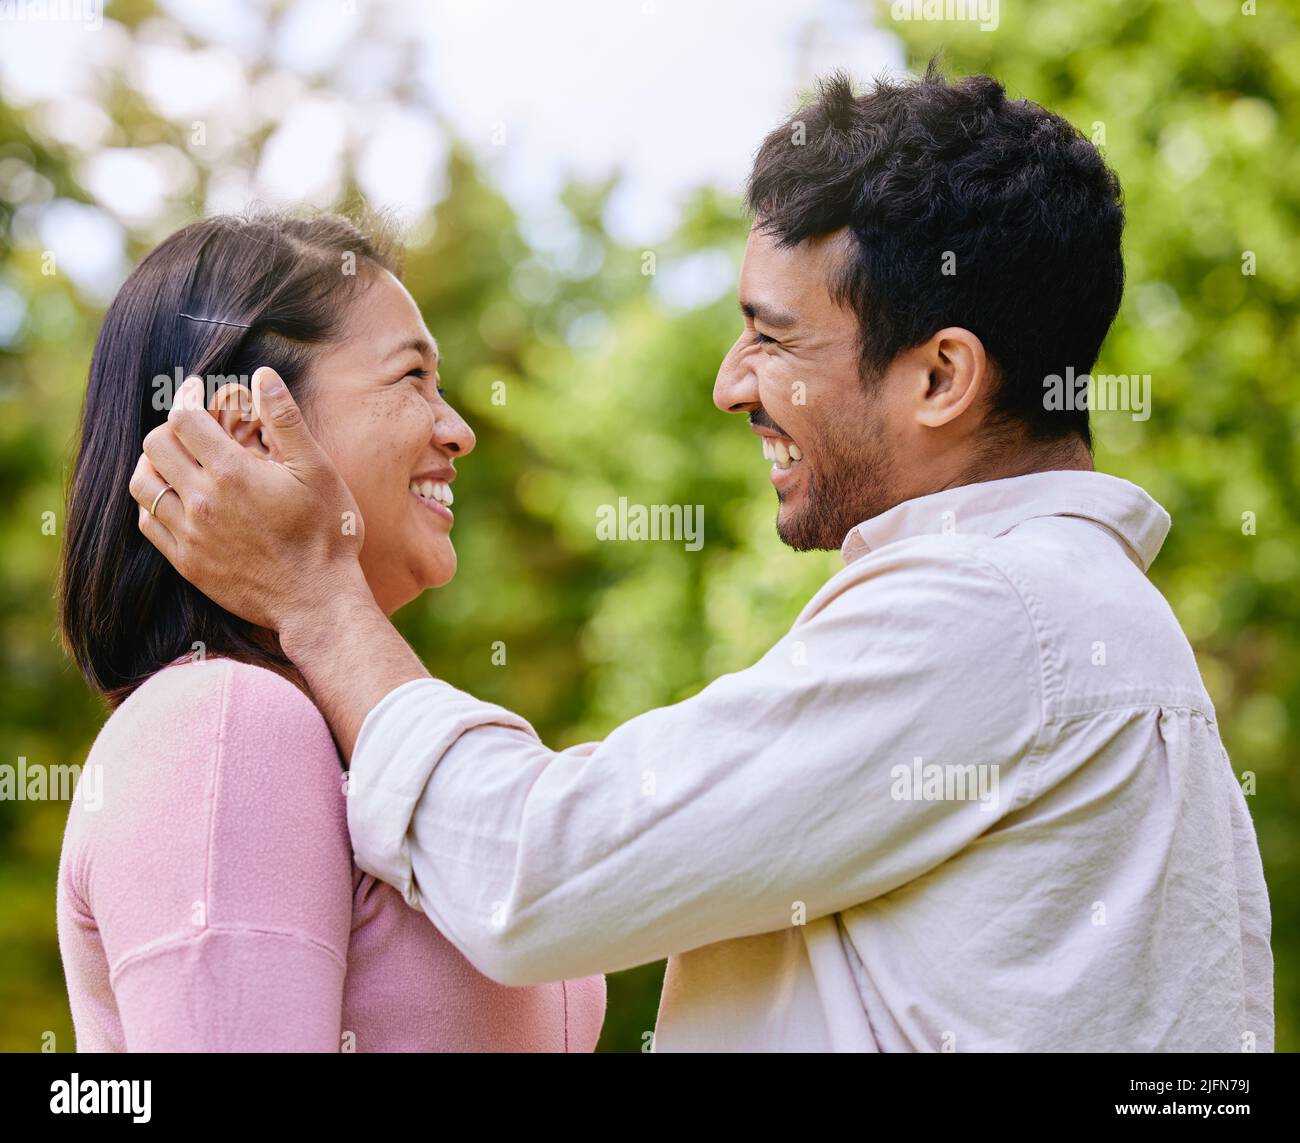 Loving husband putting hair behind wifes ear standing face to face in a park. Happy romantic moments of lovely couple spending time together outdoors Stock Photo